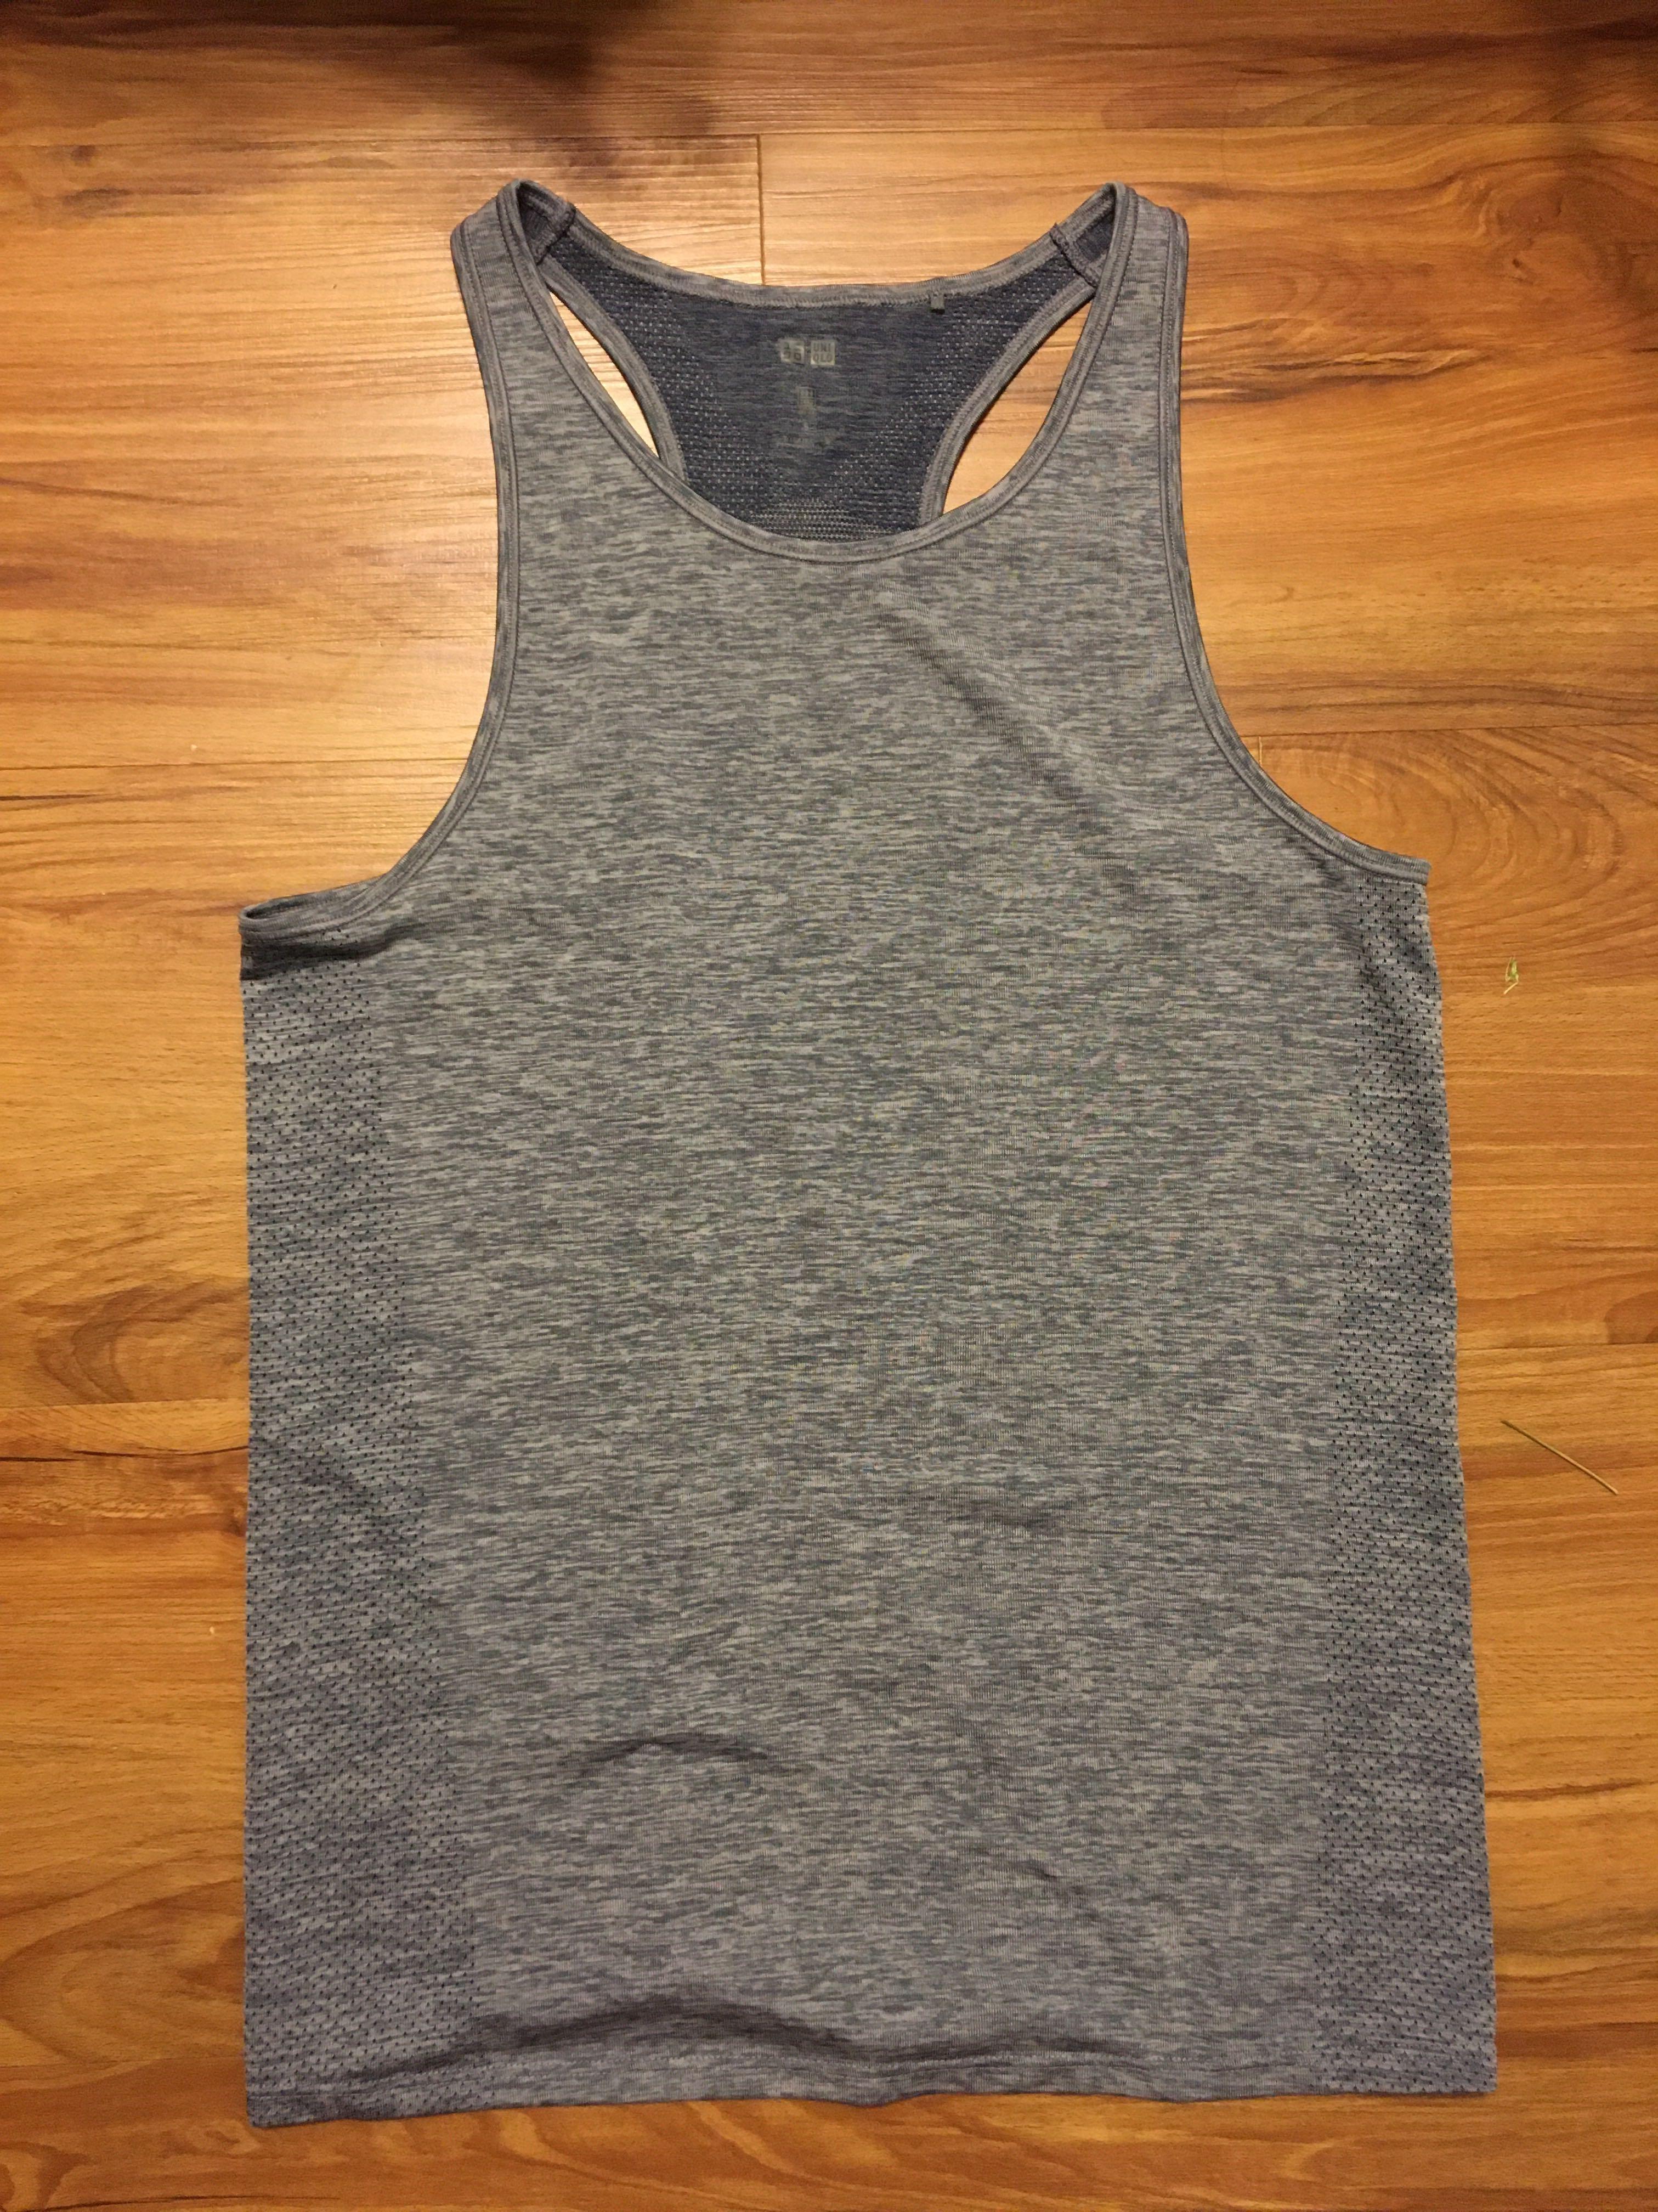 Uniqlo Airism exercise tank top in grey size S (women’s), Sports ...